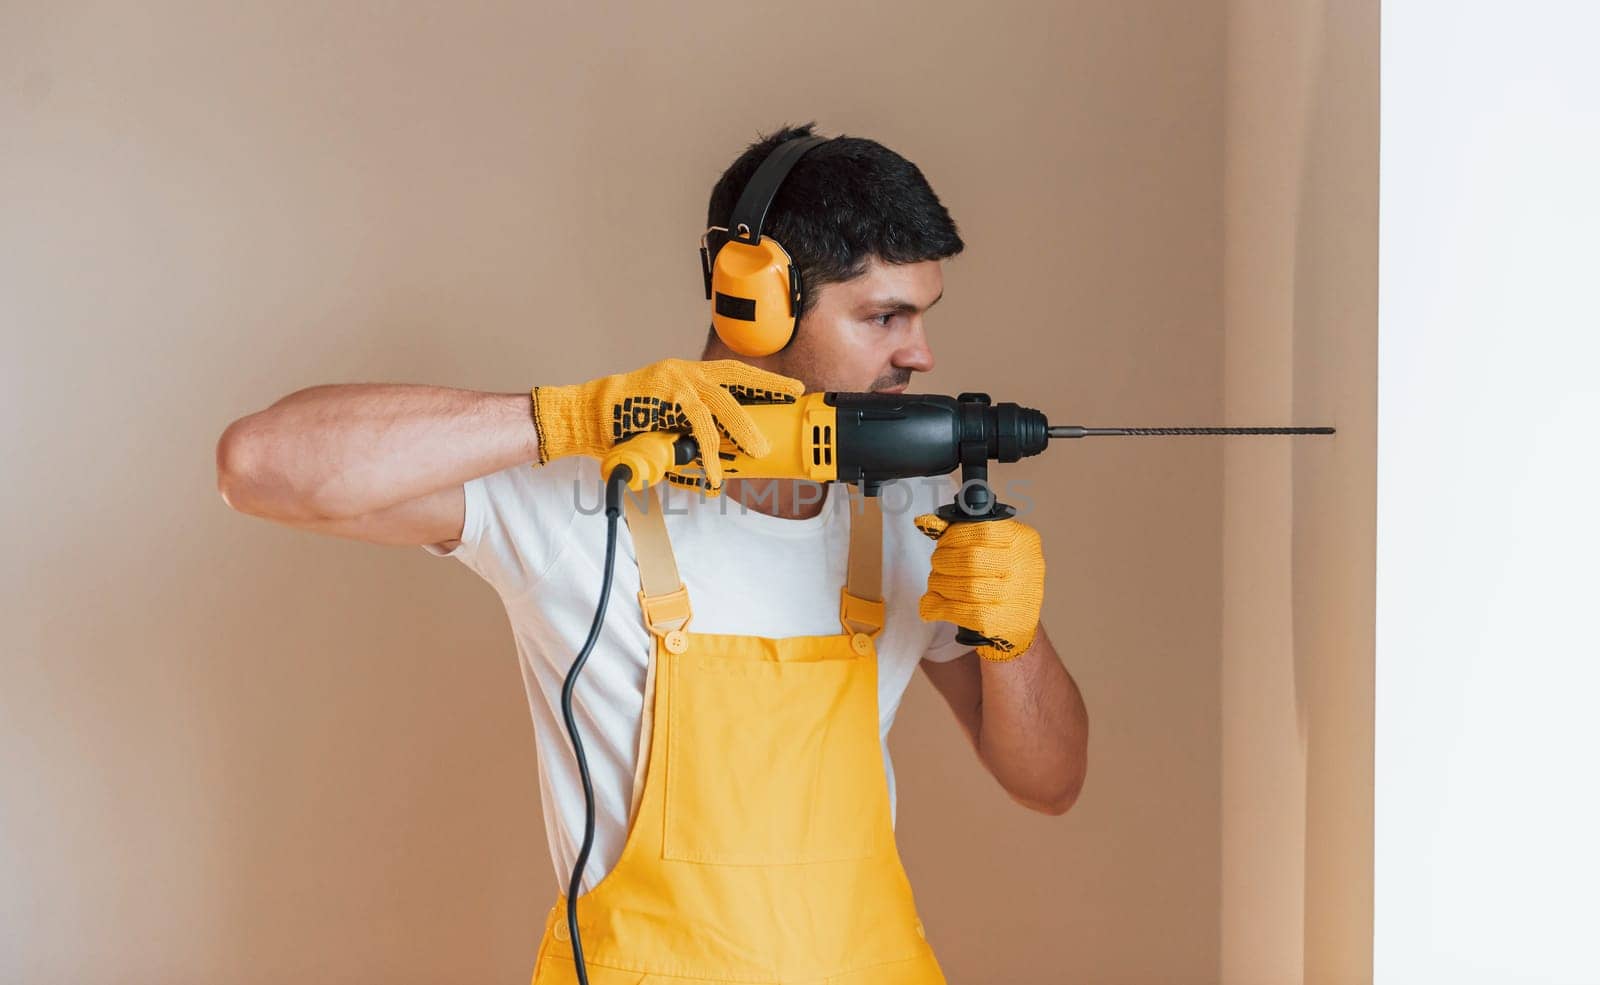 Handyman in yellow uniform works indoors by using hammer drill. House renovation conception by Standret